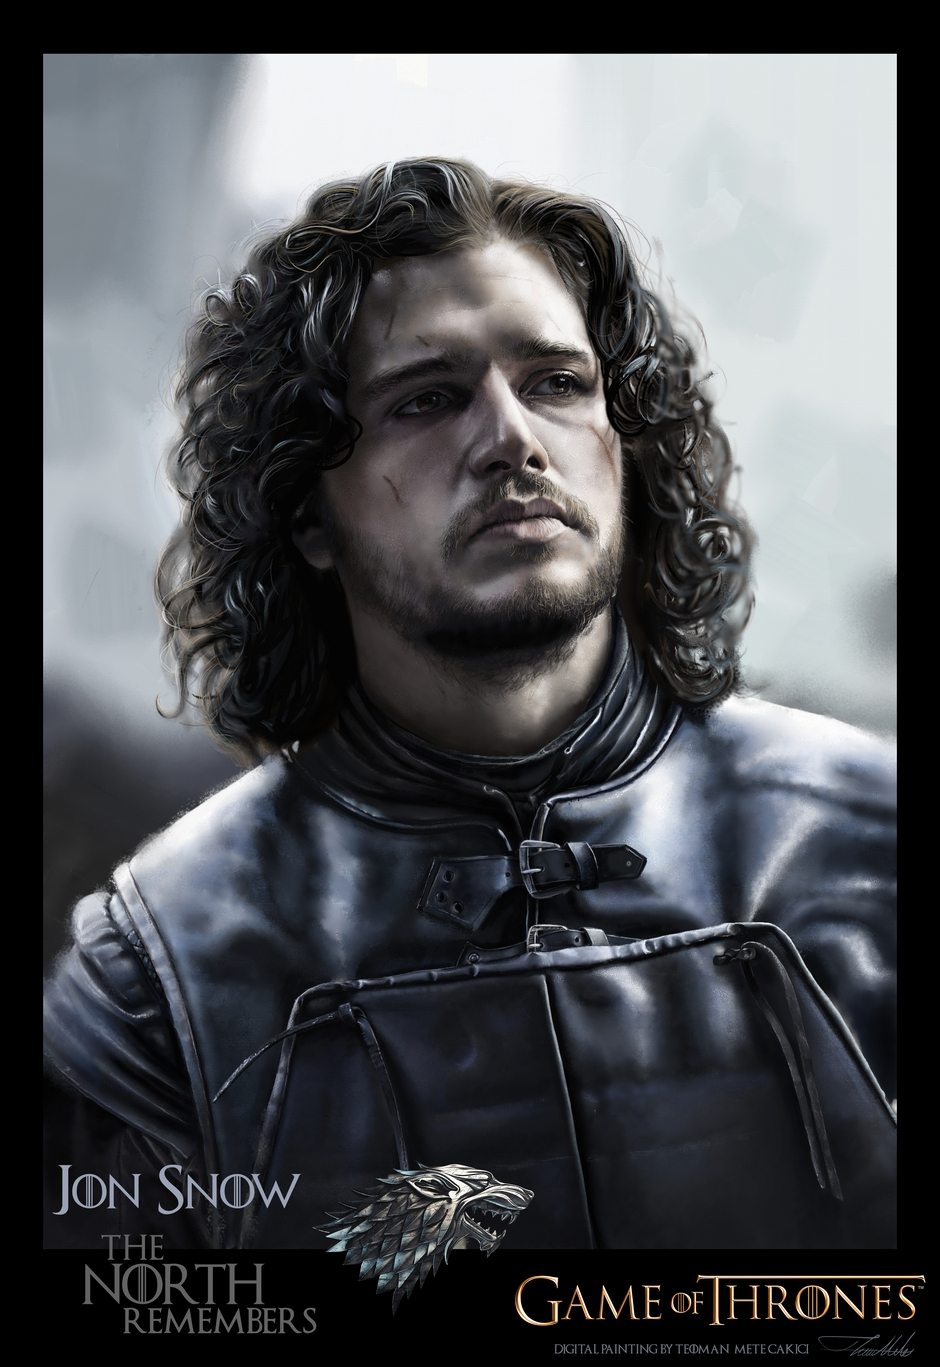 Jon Snow from Game of Thrones by Teoman Mete CAKICI